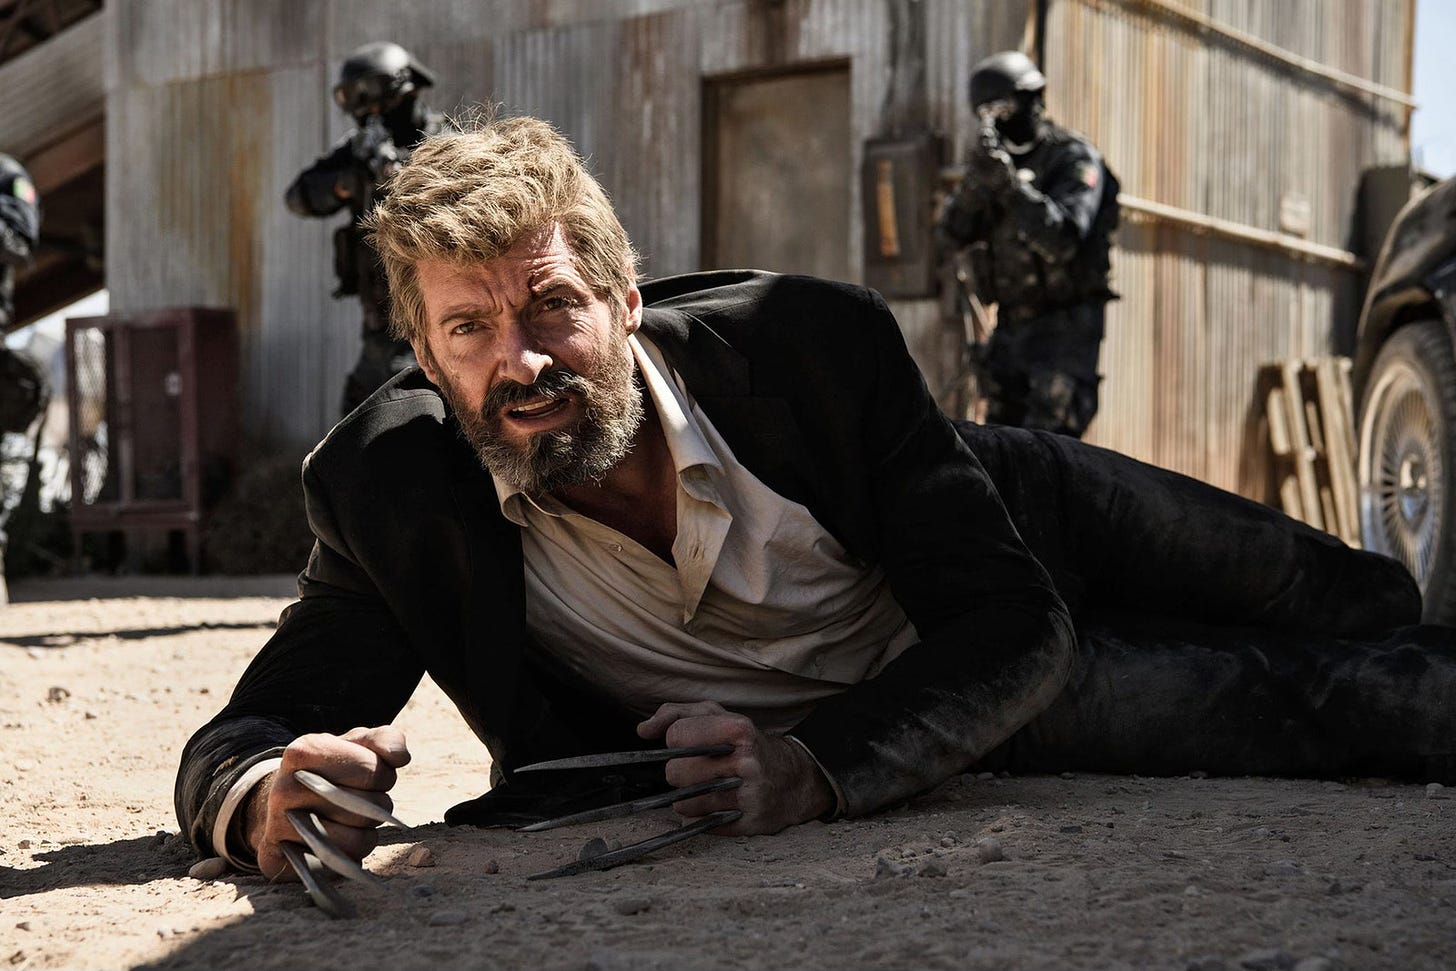 Screenshot from Logan with Wolverine lying in the dirt, claws bared, surrounded by gun-toting men in body armor.